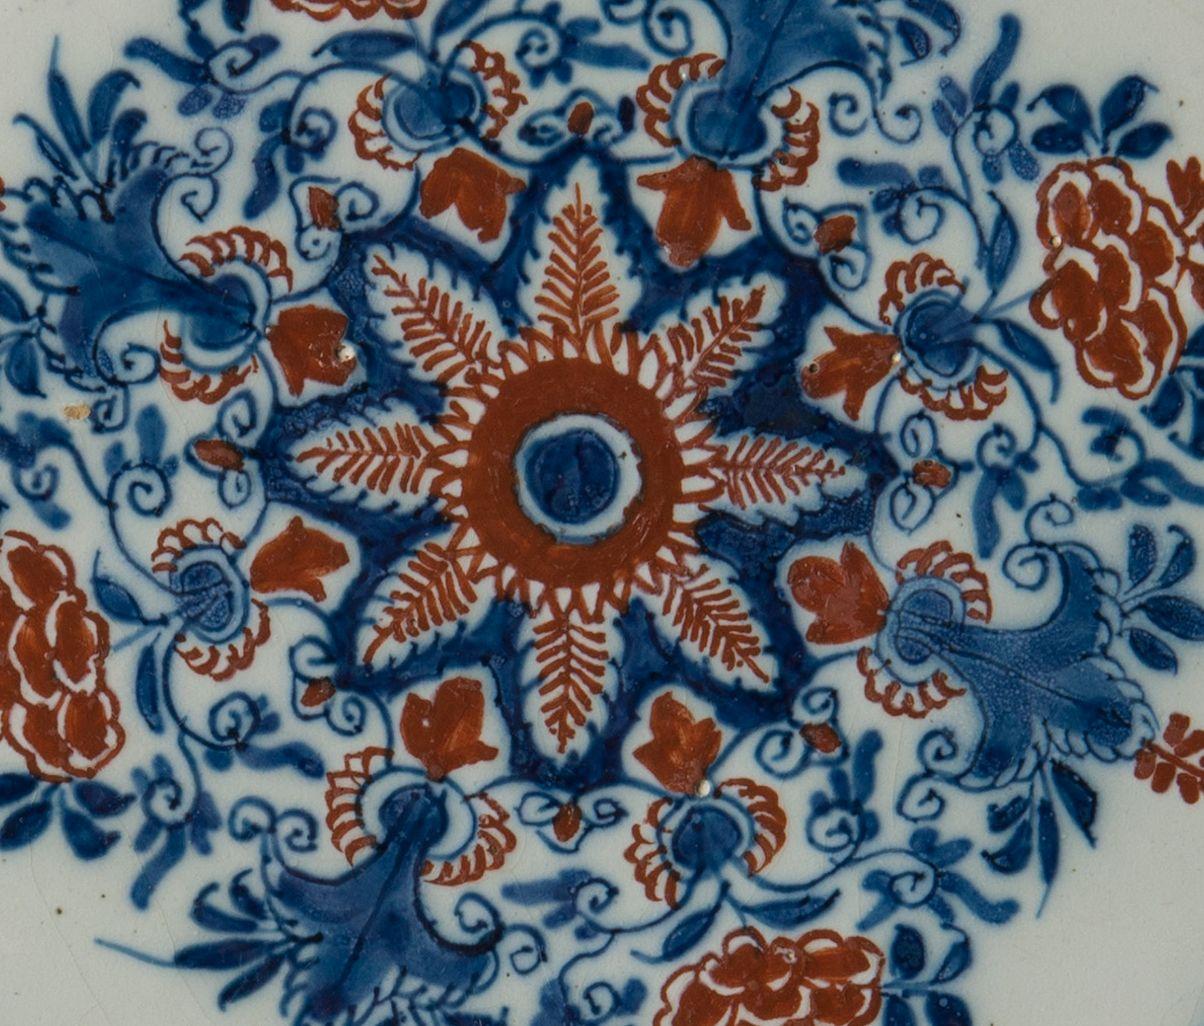 Hand-Painted Cashmere Plate, Delft, 1701-1722 The Greek a Pottery